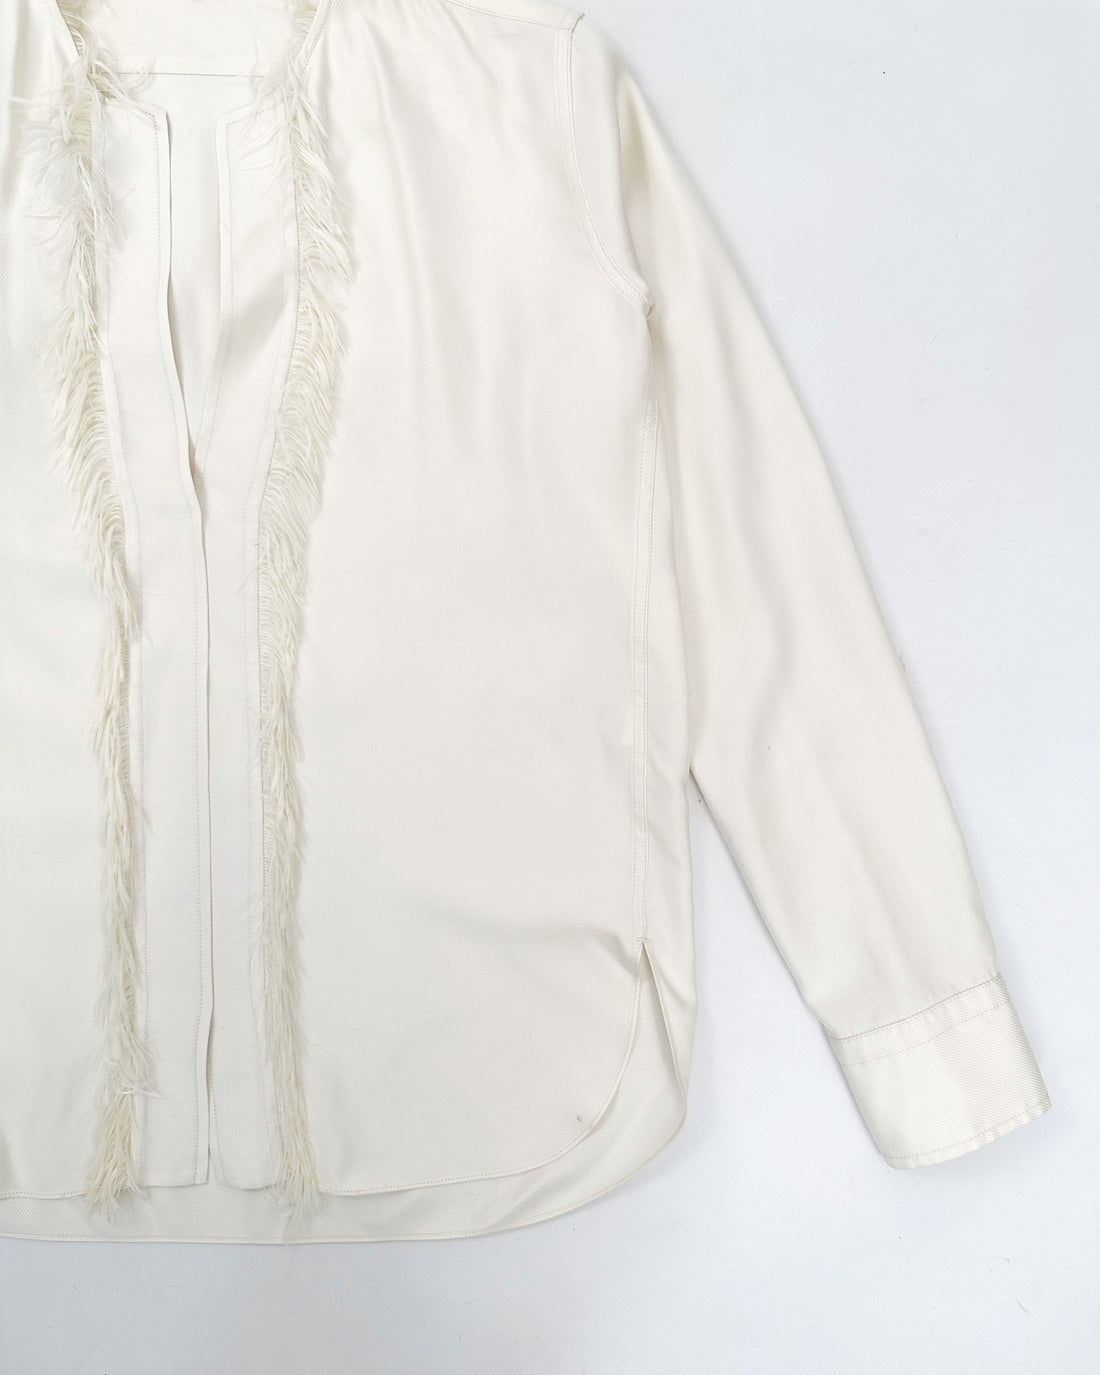 Helmut Lang White Feathered Shirt 2000's